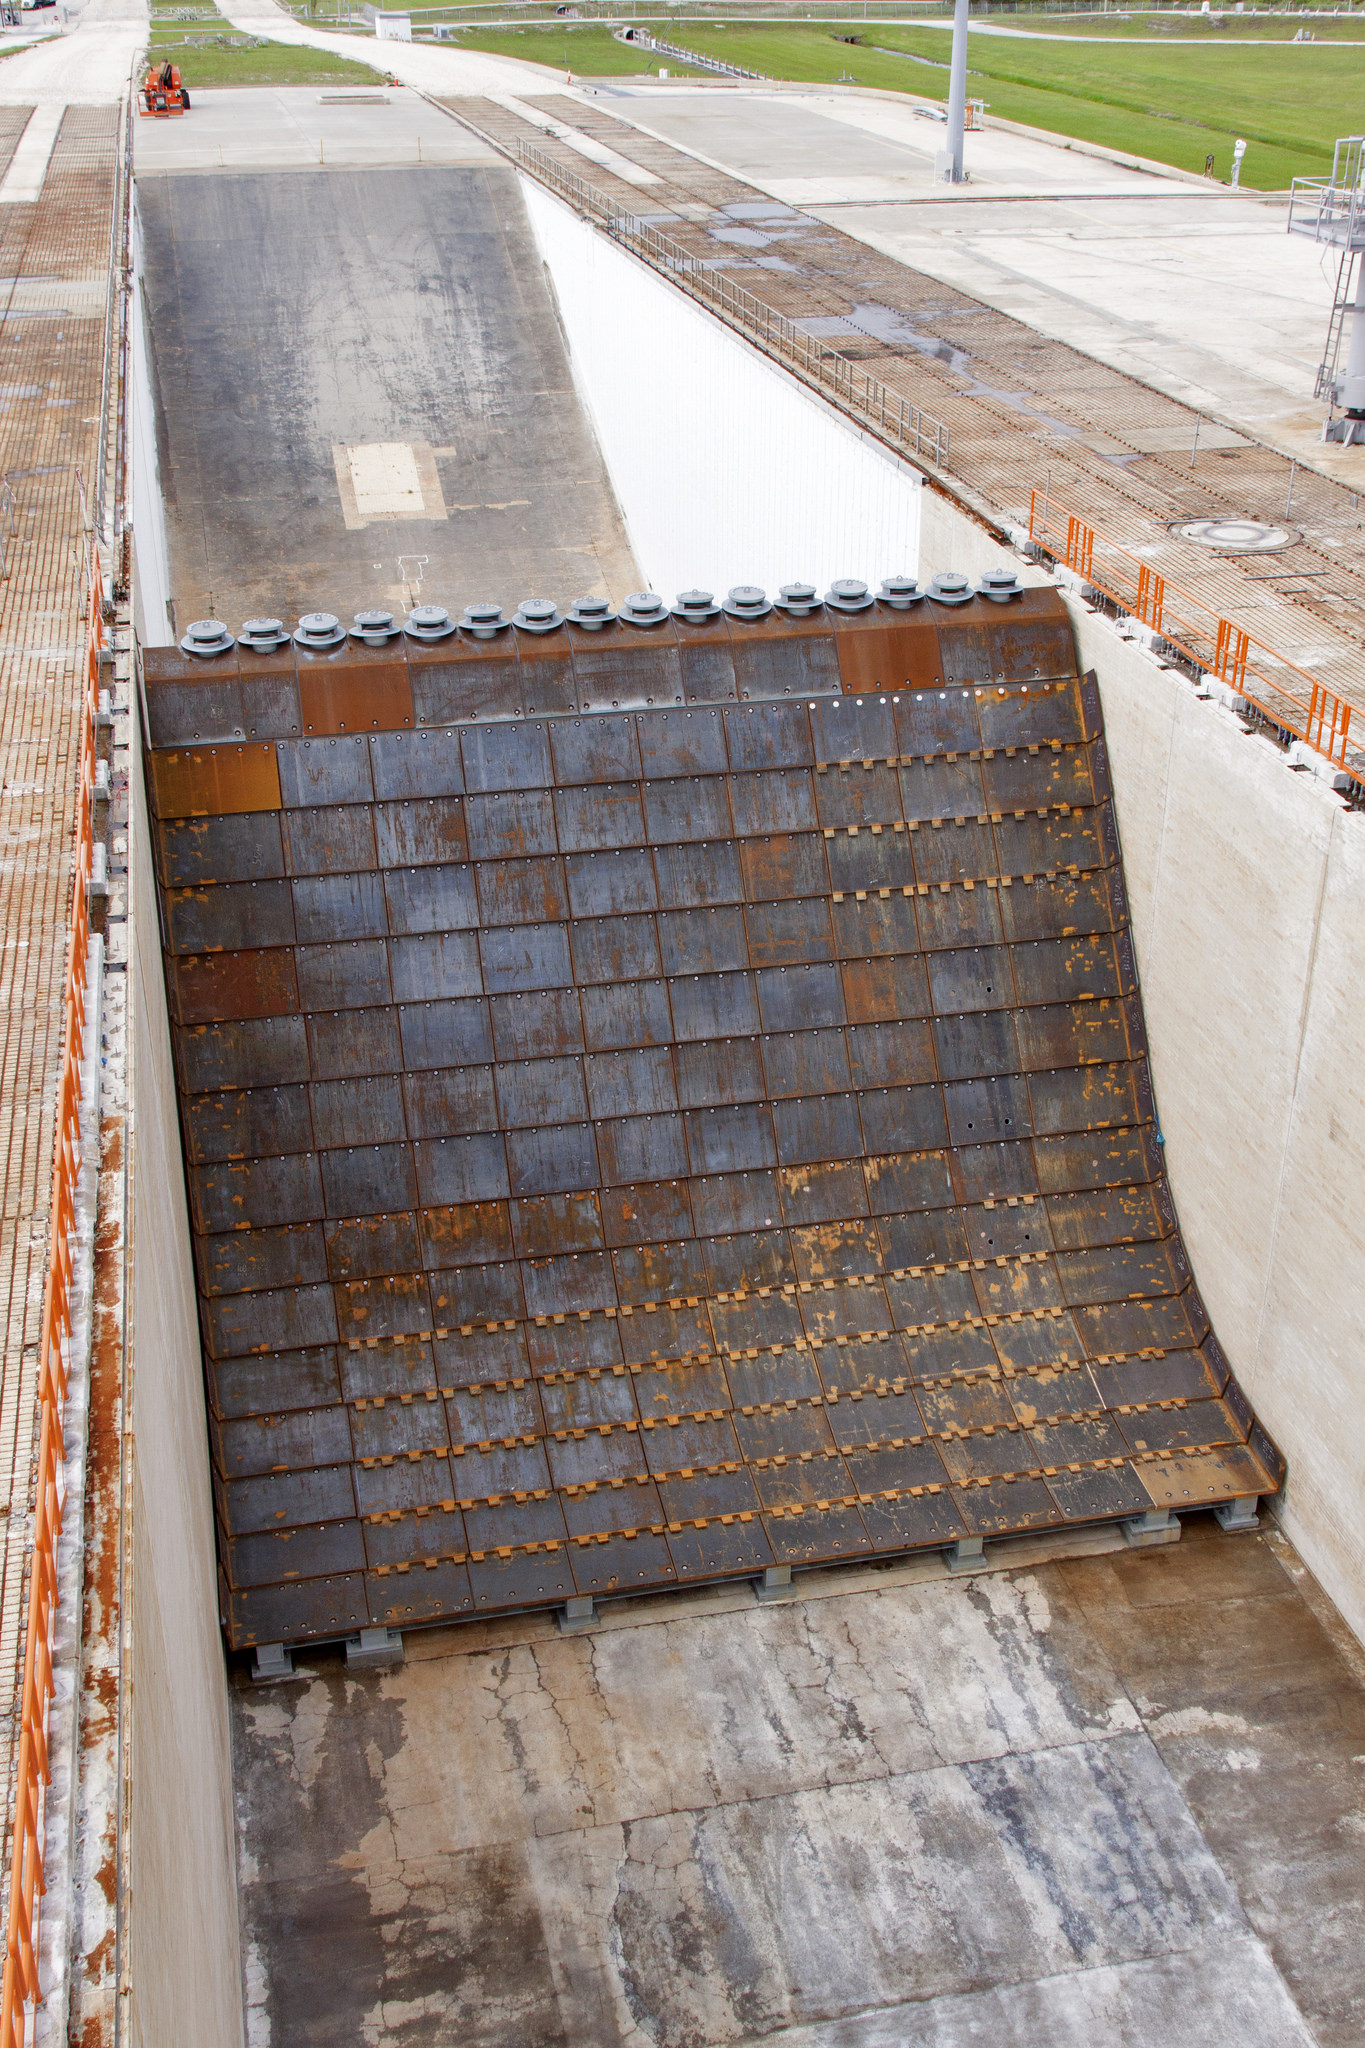 A close-up view of the main flame deflector in the flame trench at Launch Complex 39B at NASA's Kennedy Space Center.